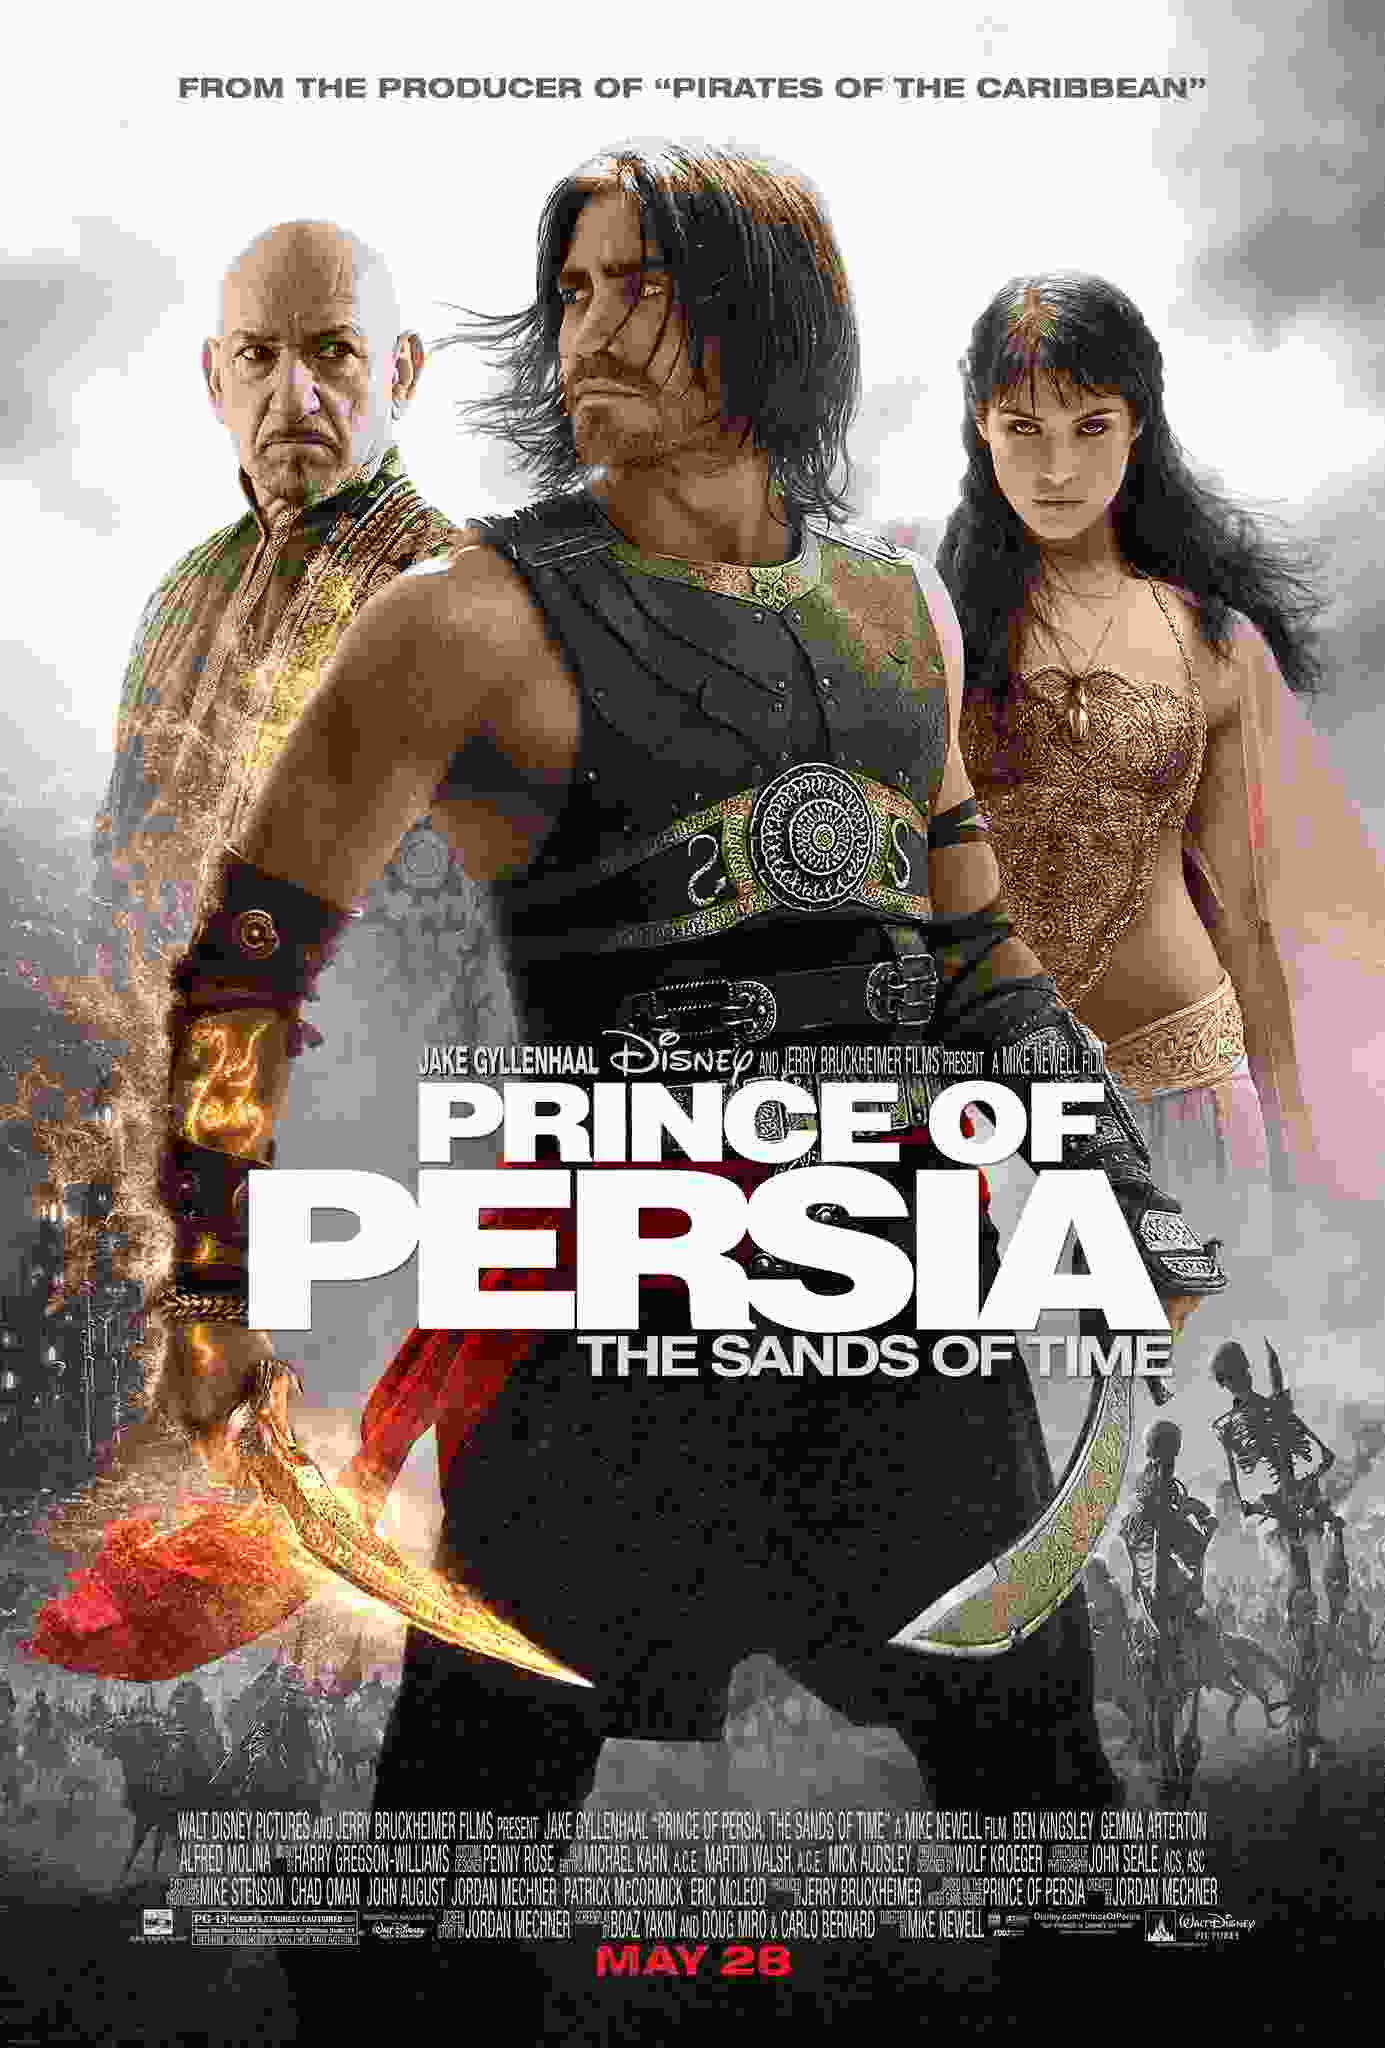 Prince of Persia: The Sands of Time (2010) vj emmy Jake Gyllenhaal